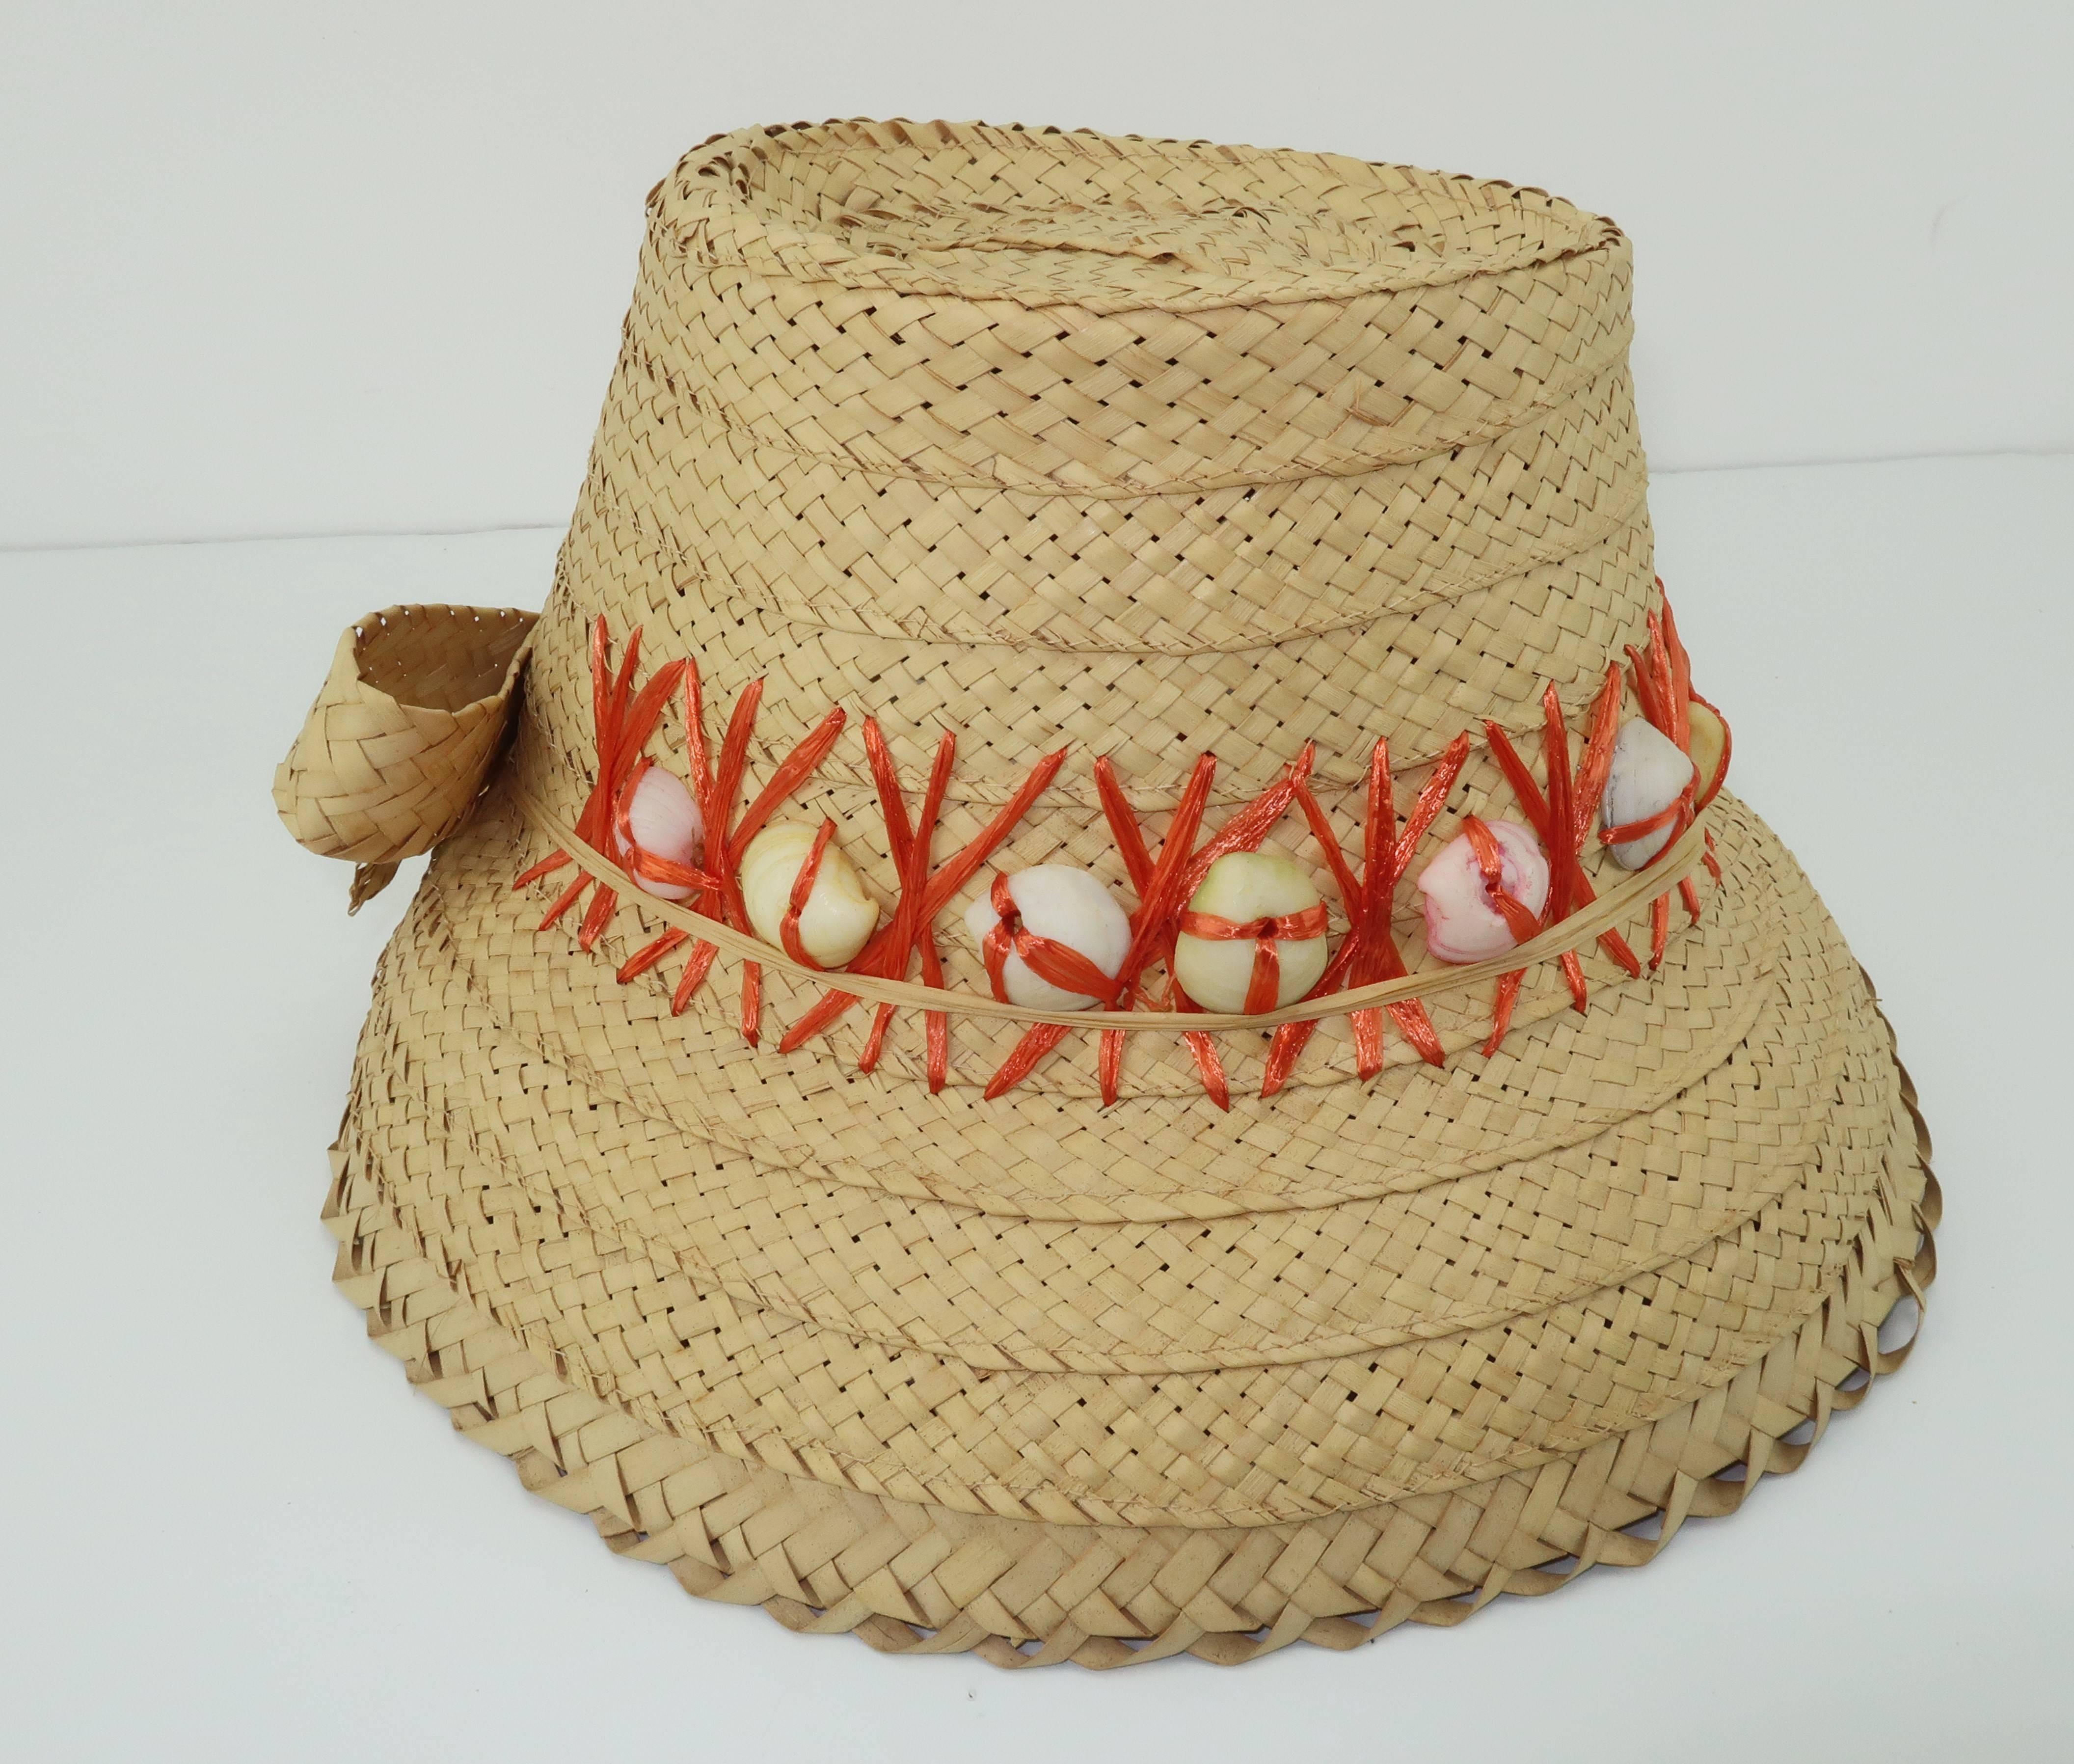 Make this C.1960 straw bucket hat your favorite beach companion for sunshine filled days.  The comfortable design is accented with orange raffia trim embellished with a bow and real sea shells for an authentic beachy look.  Very good condition. 